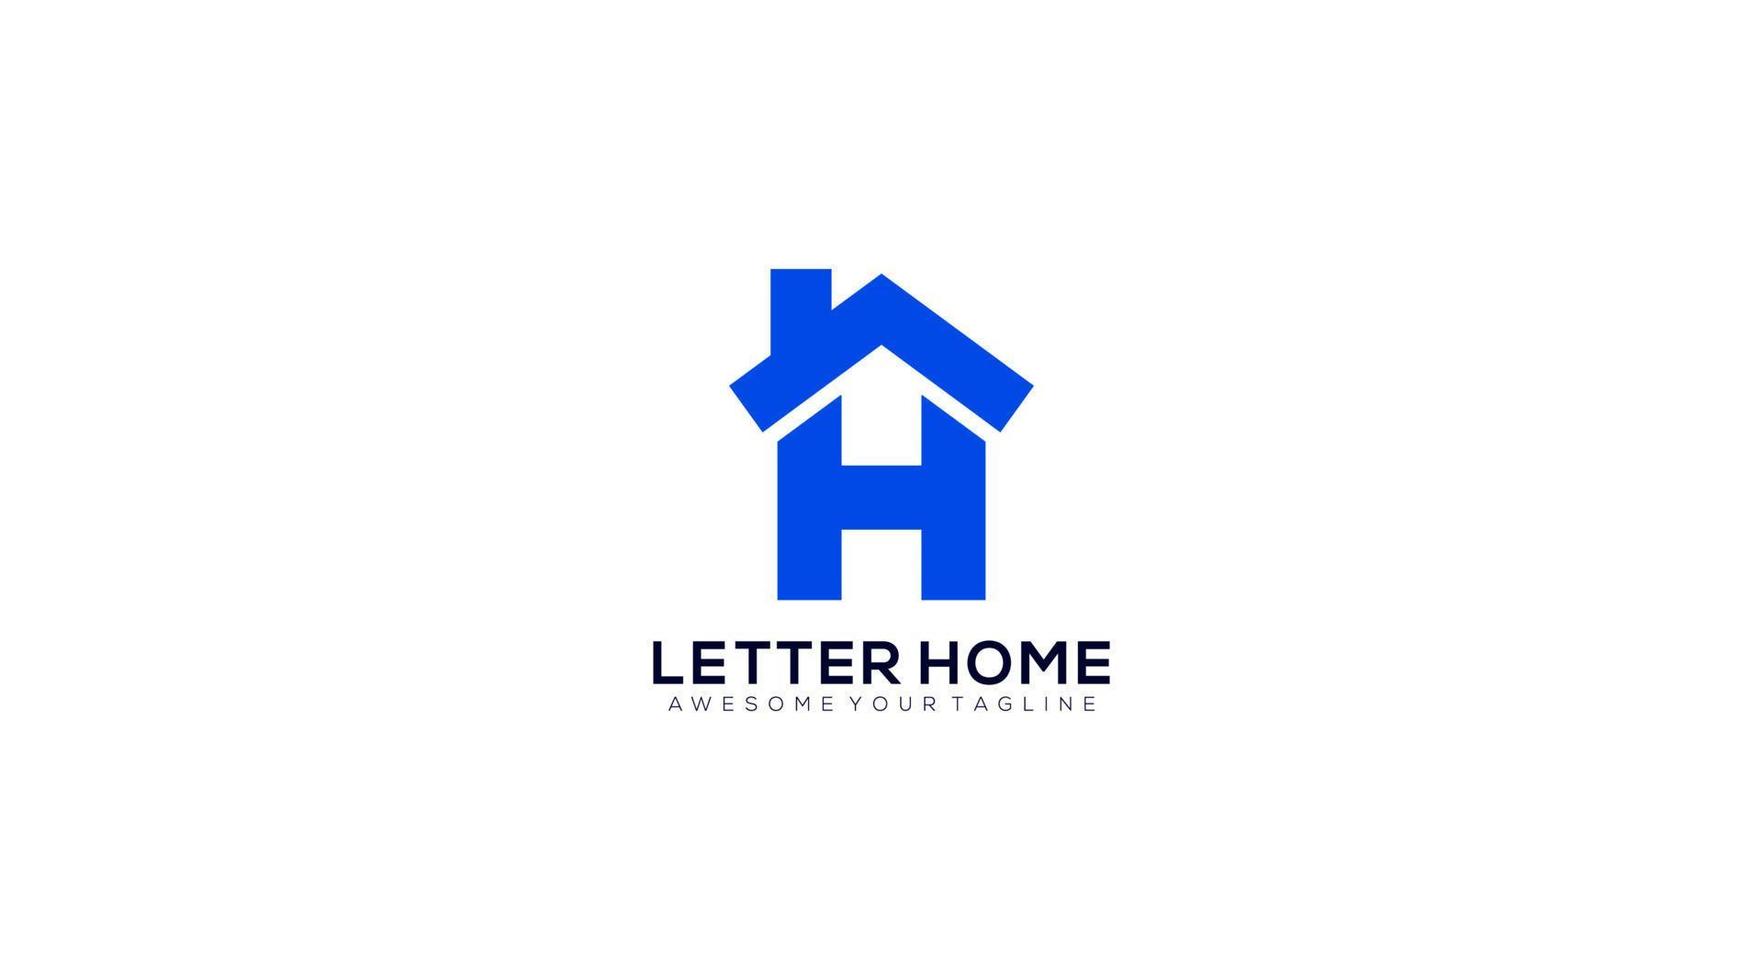 Abstract vector logo combines house and the letter H logo design